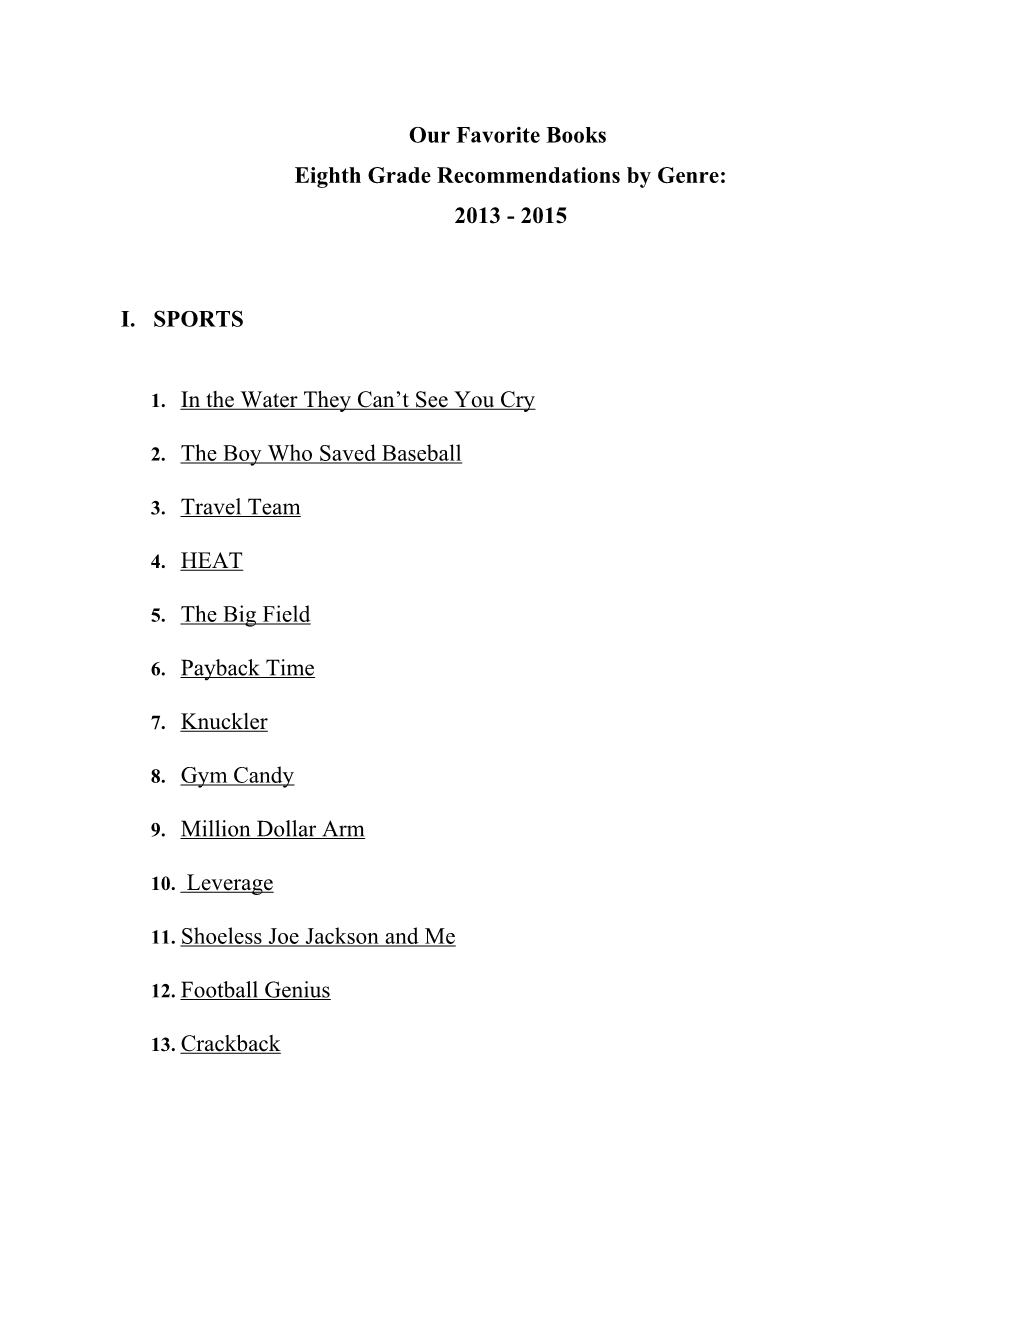 Eighth Grade Recommendations by Genre